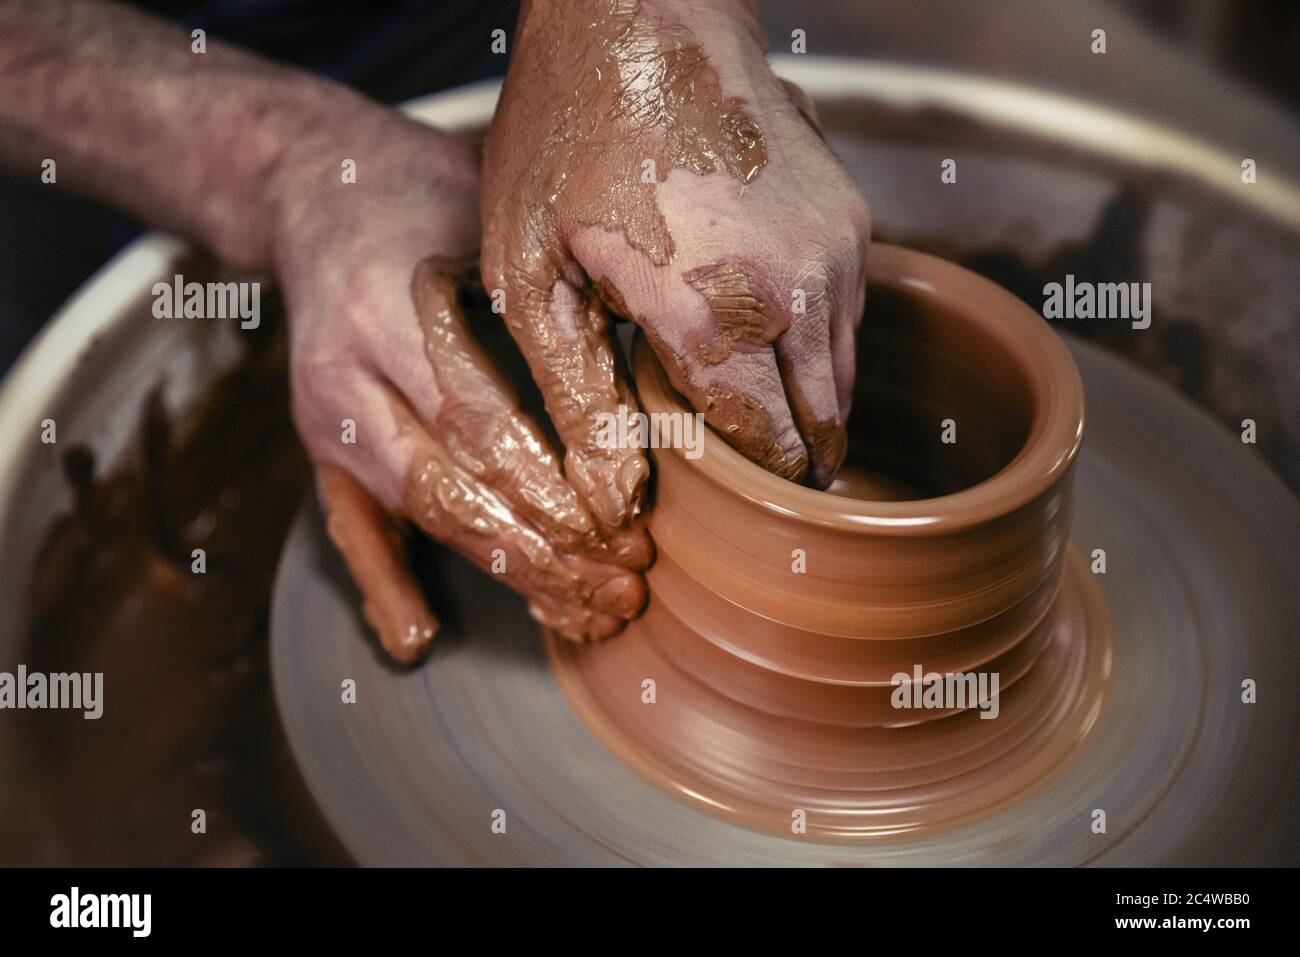 A day in the life of a pottery artist - at the pottery wheel. Stock Photo